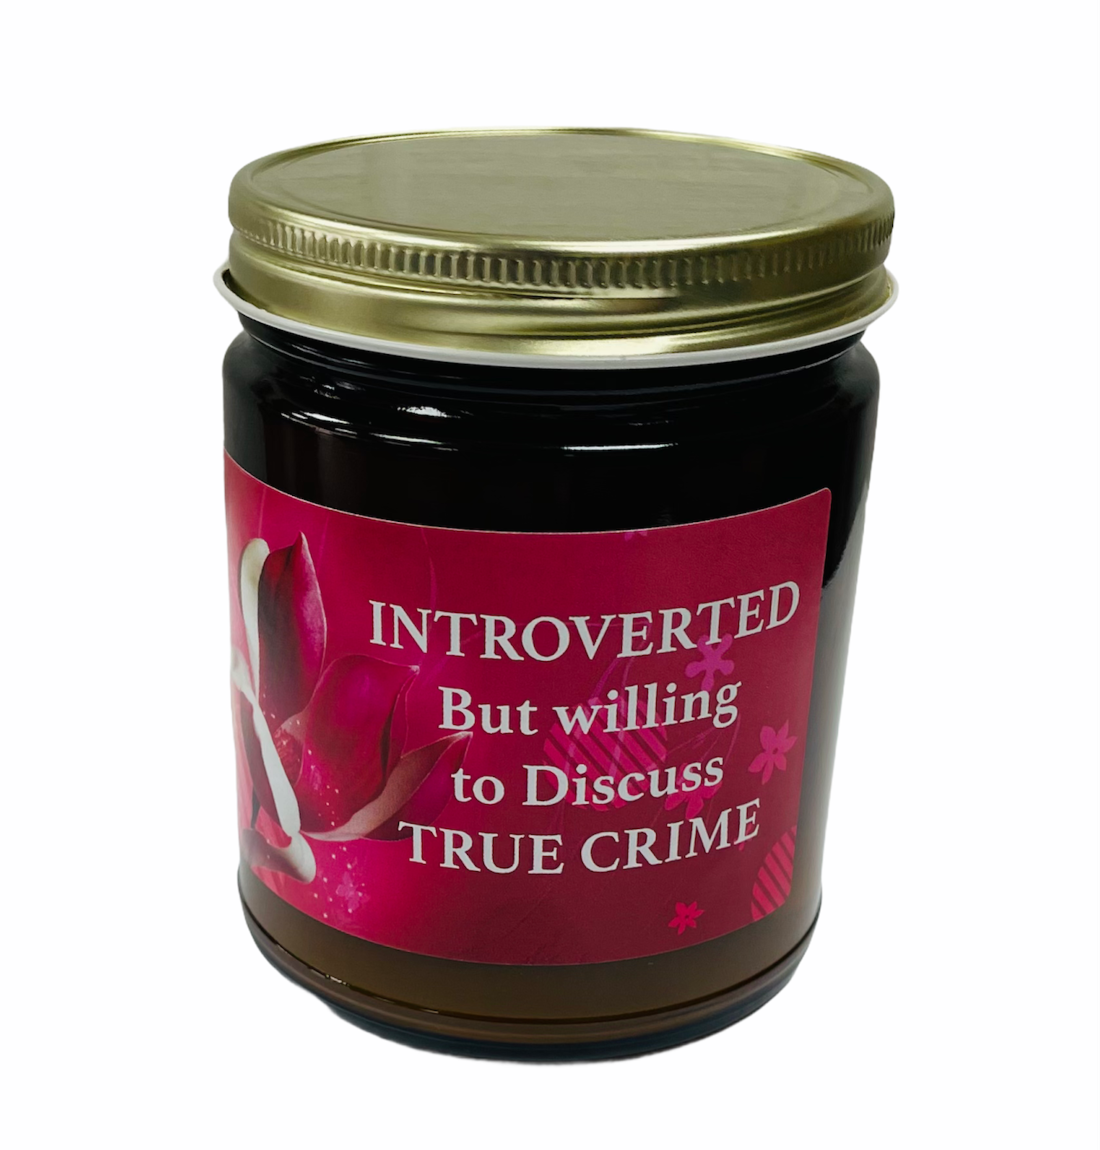 INTROVERTED, but willing to discuss TRUE CRIME